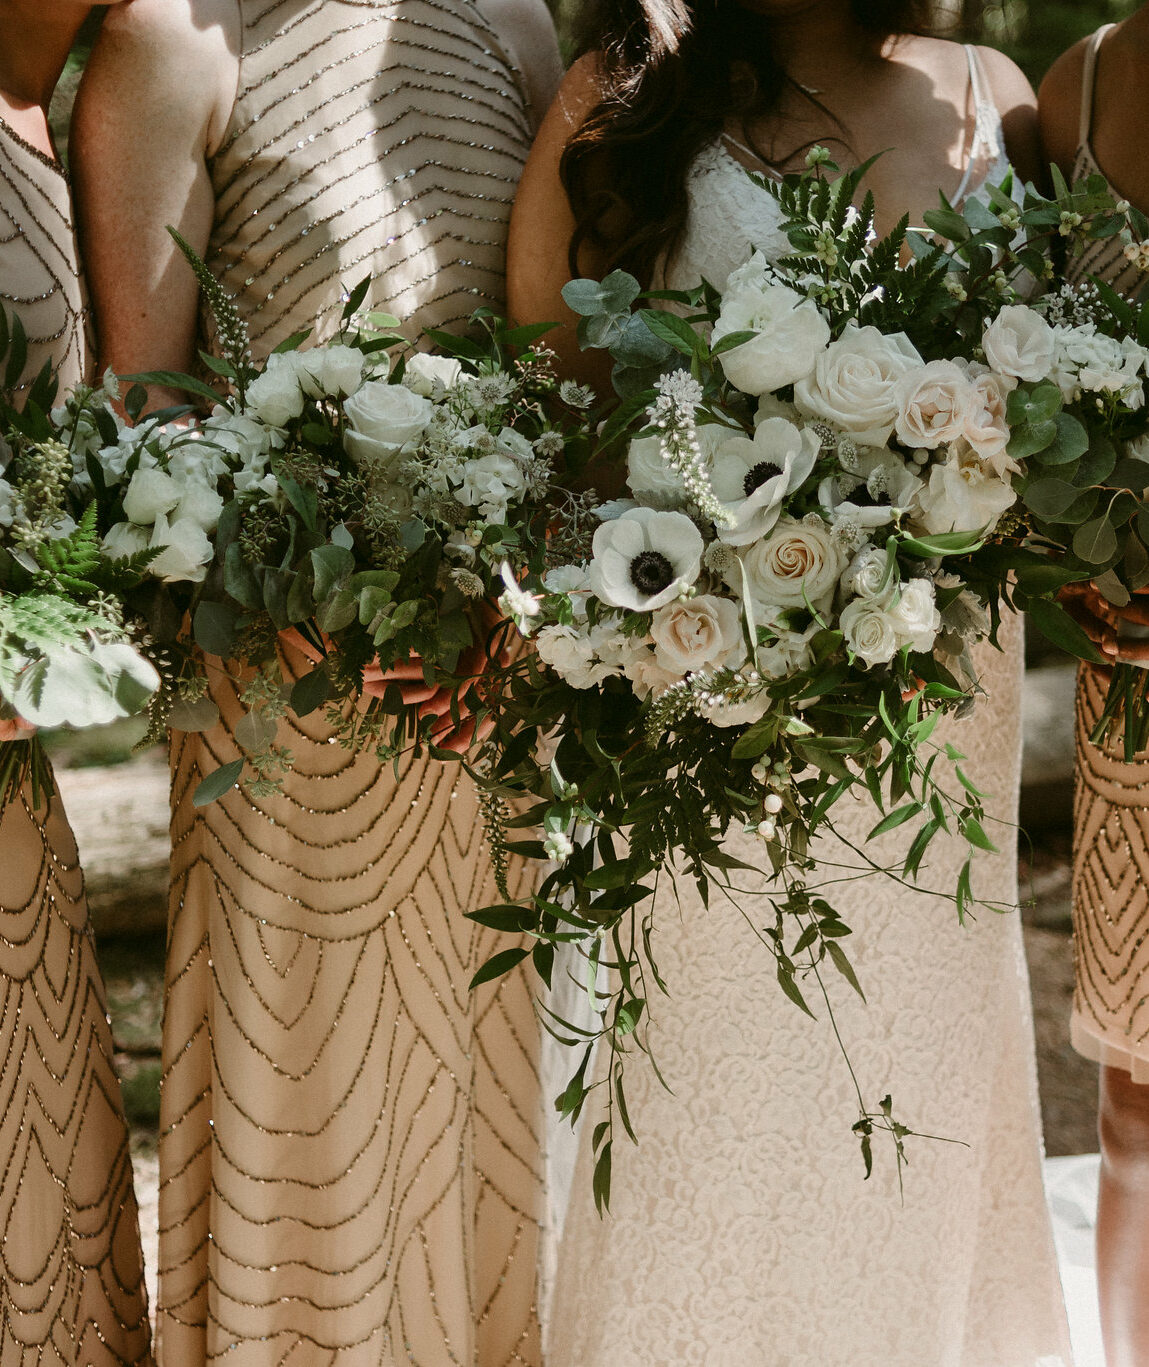 Bride and bridesmaids holding bouquets of flowers at wedding